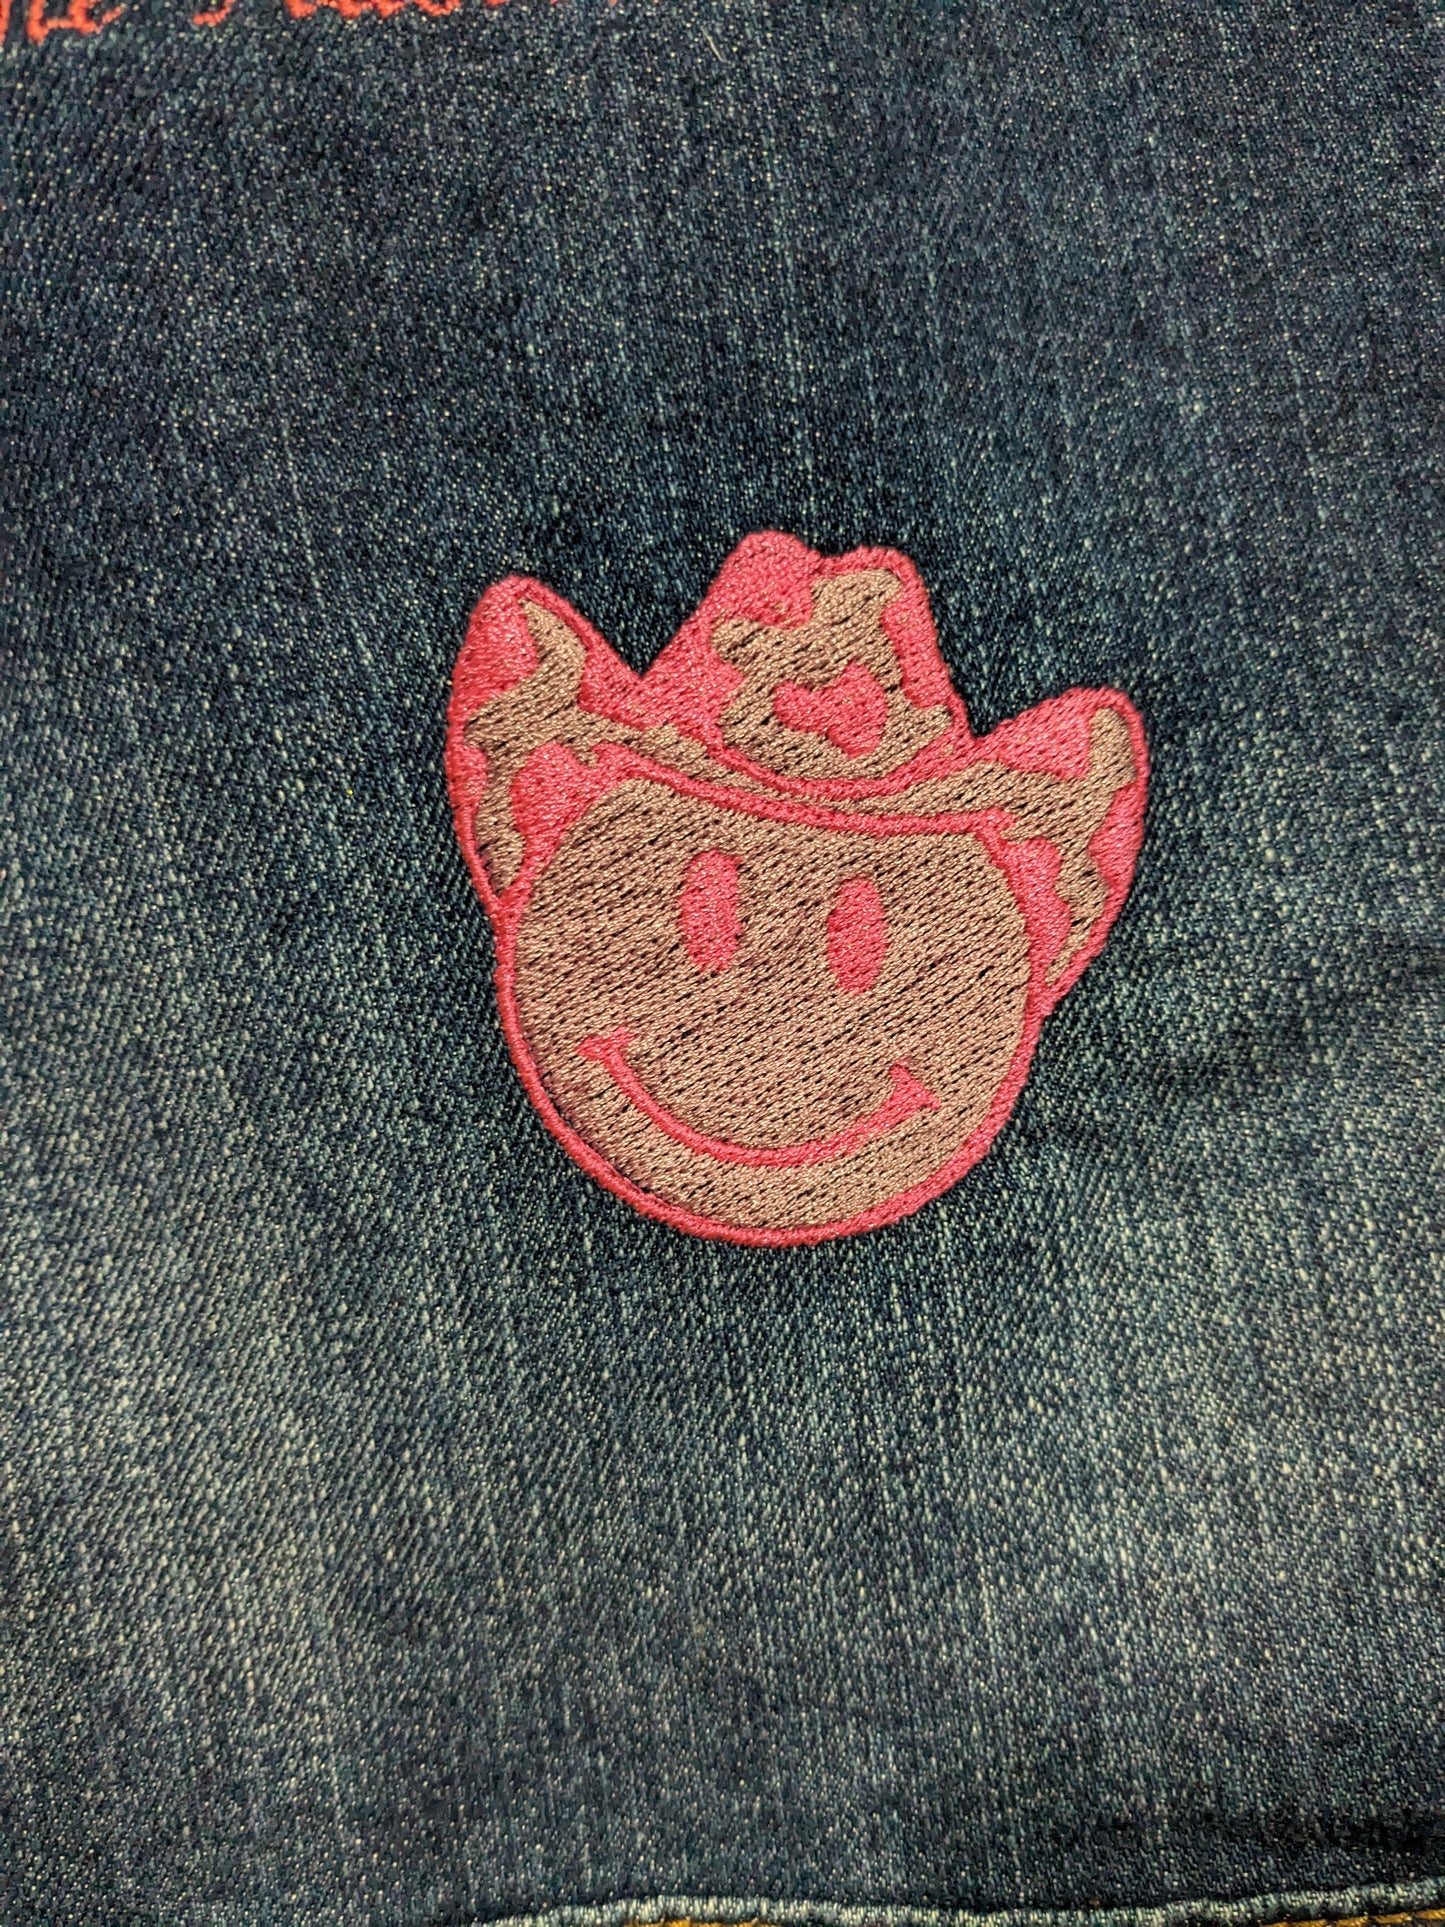 Size 16 Jane Austen Reworked Denim Jacket - Rainbow Embroidery - Cowboy Hat Detail - Know your own happiness